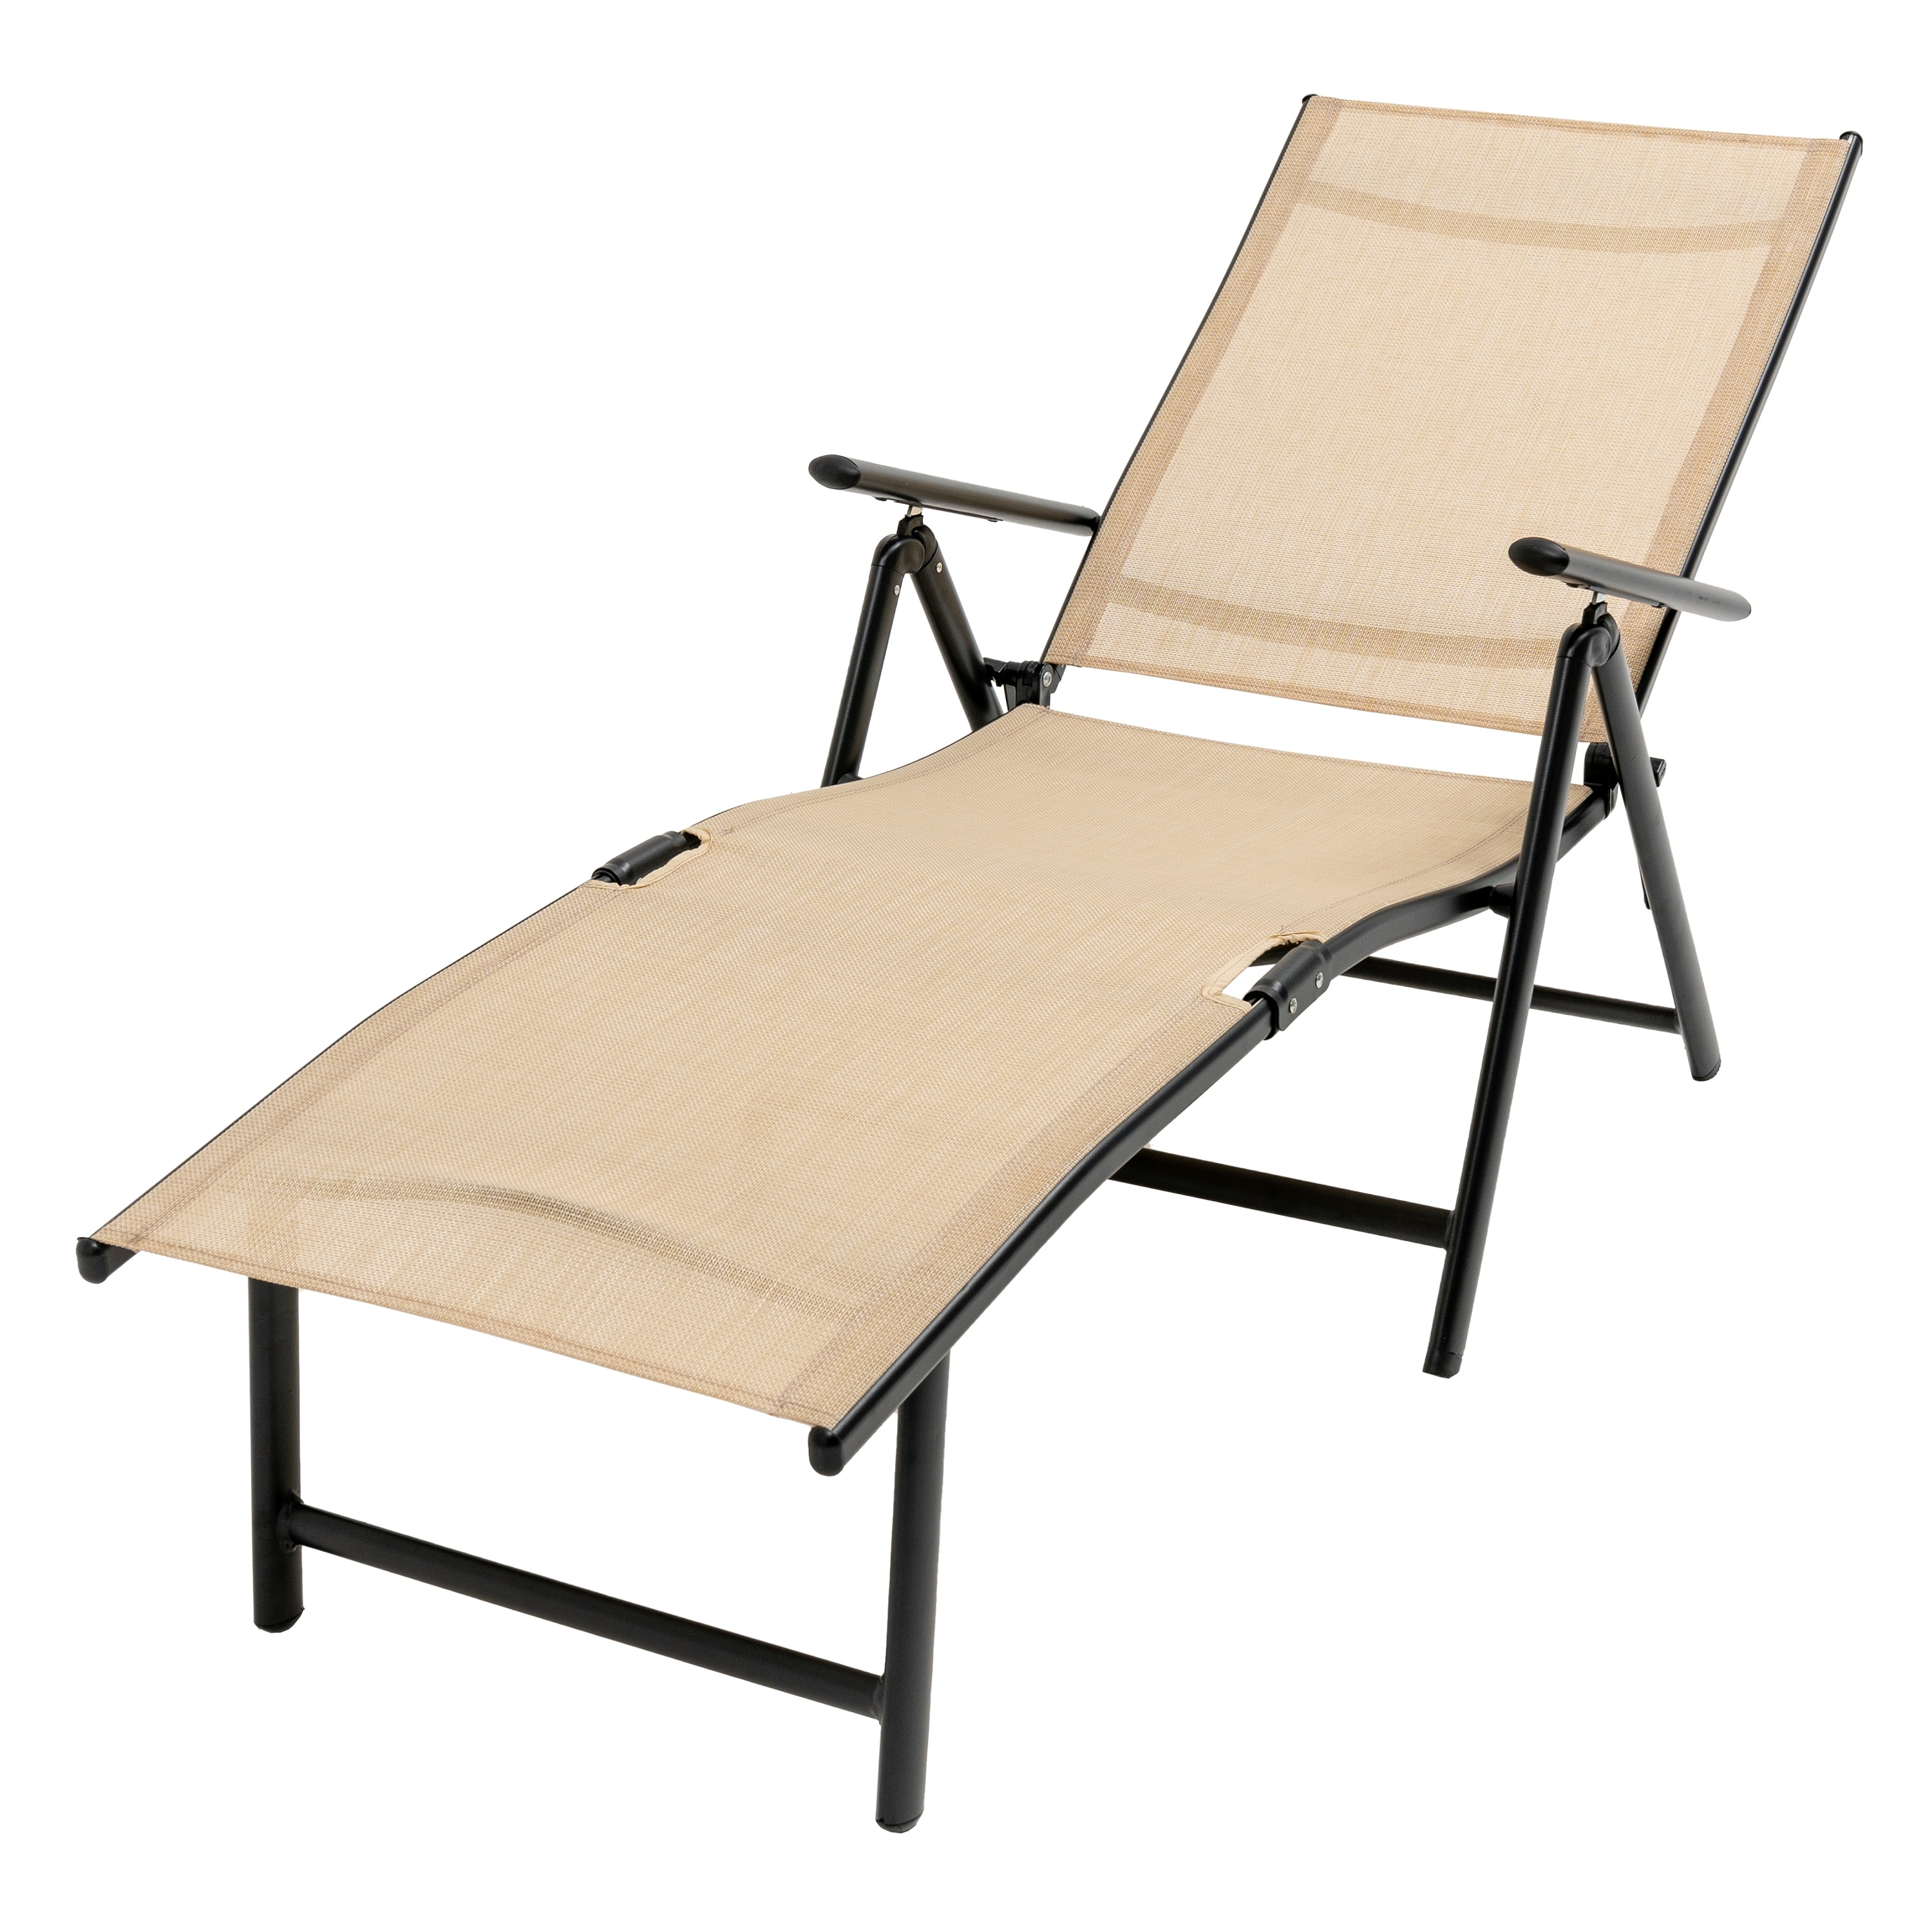 Outdoor Folding Chaise Lounge Chair patio Textilene Reclining Lounge Chair